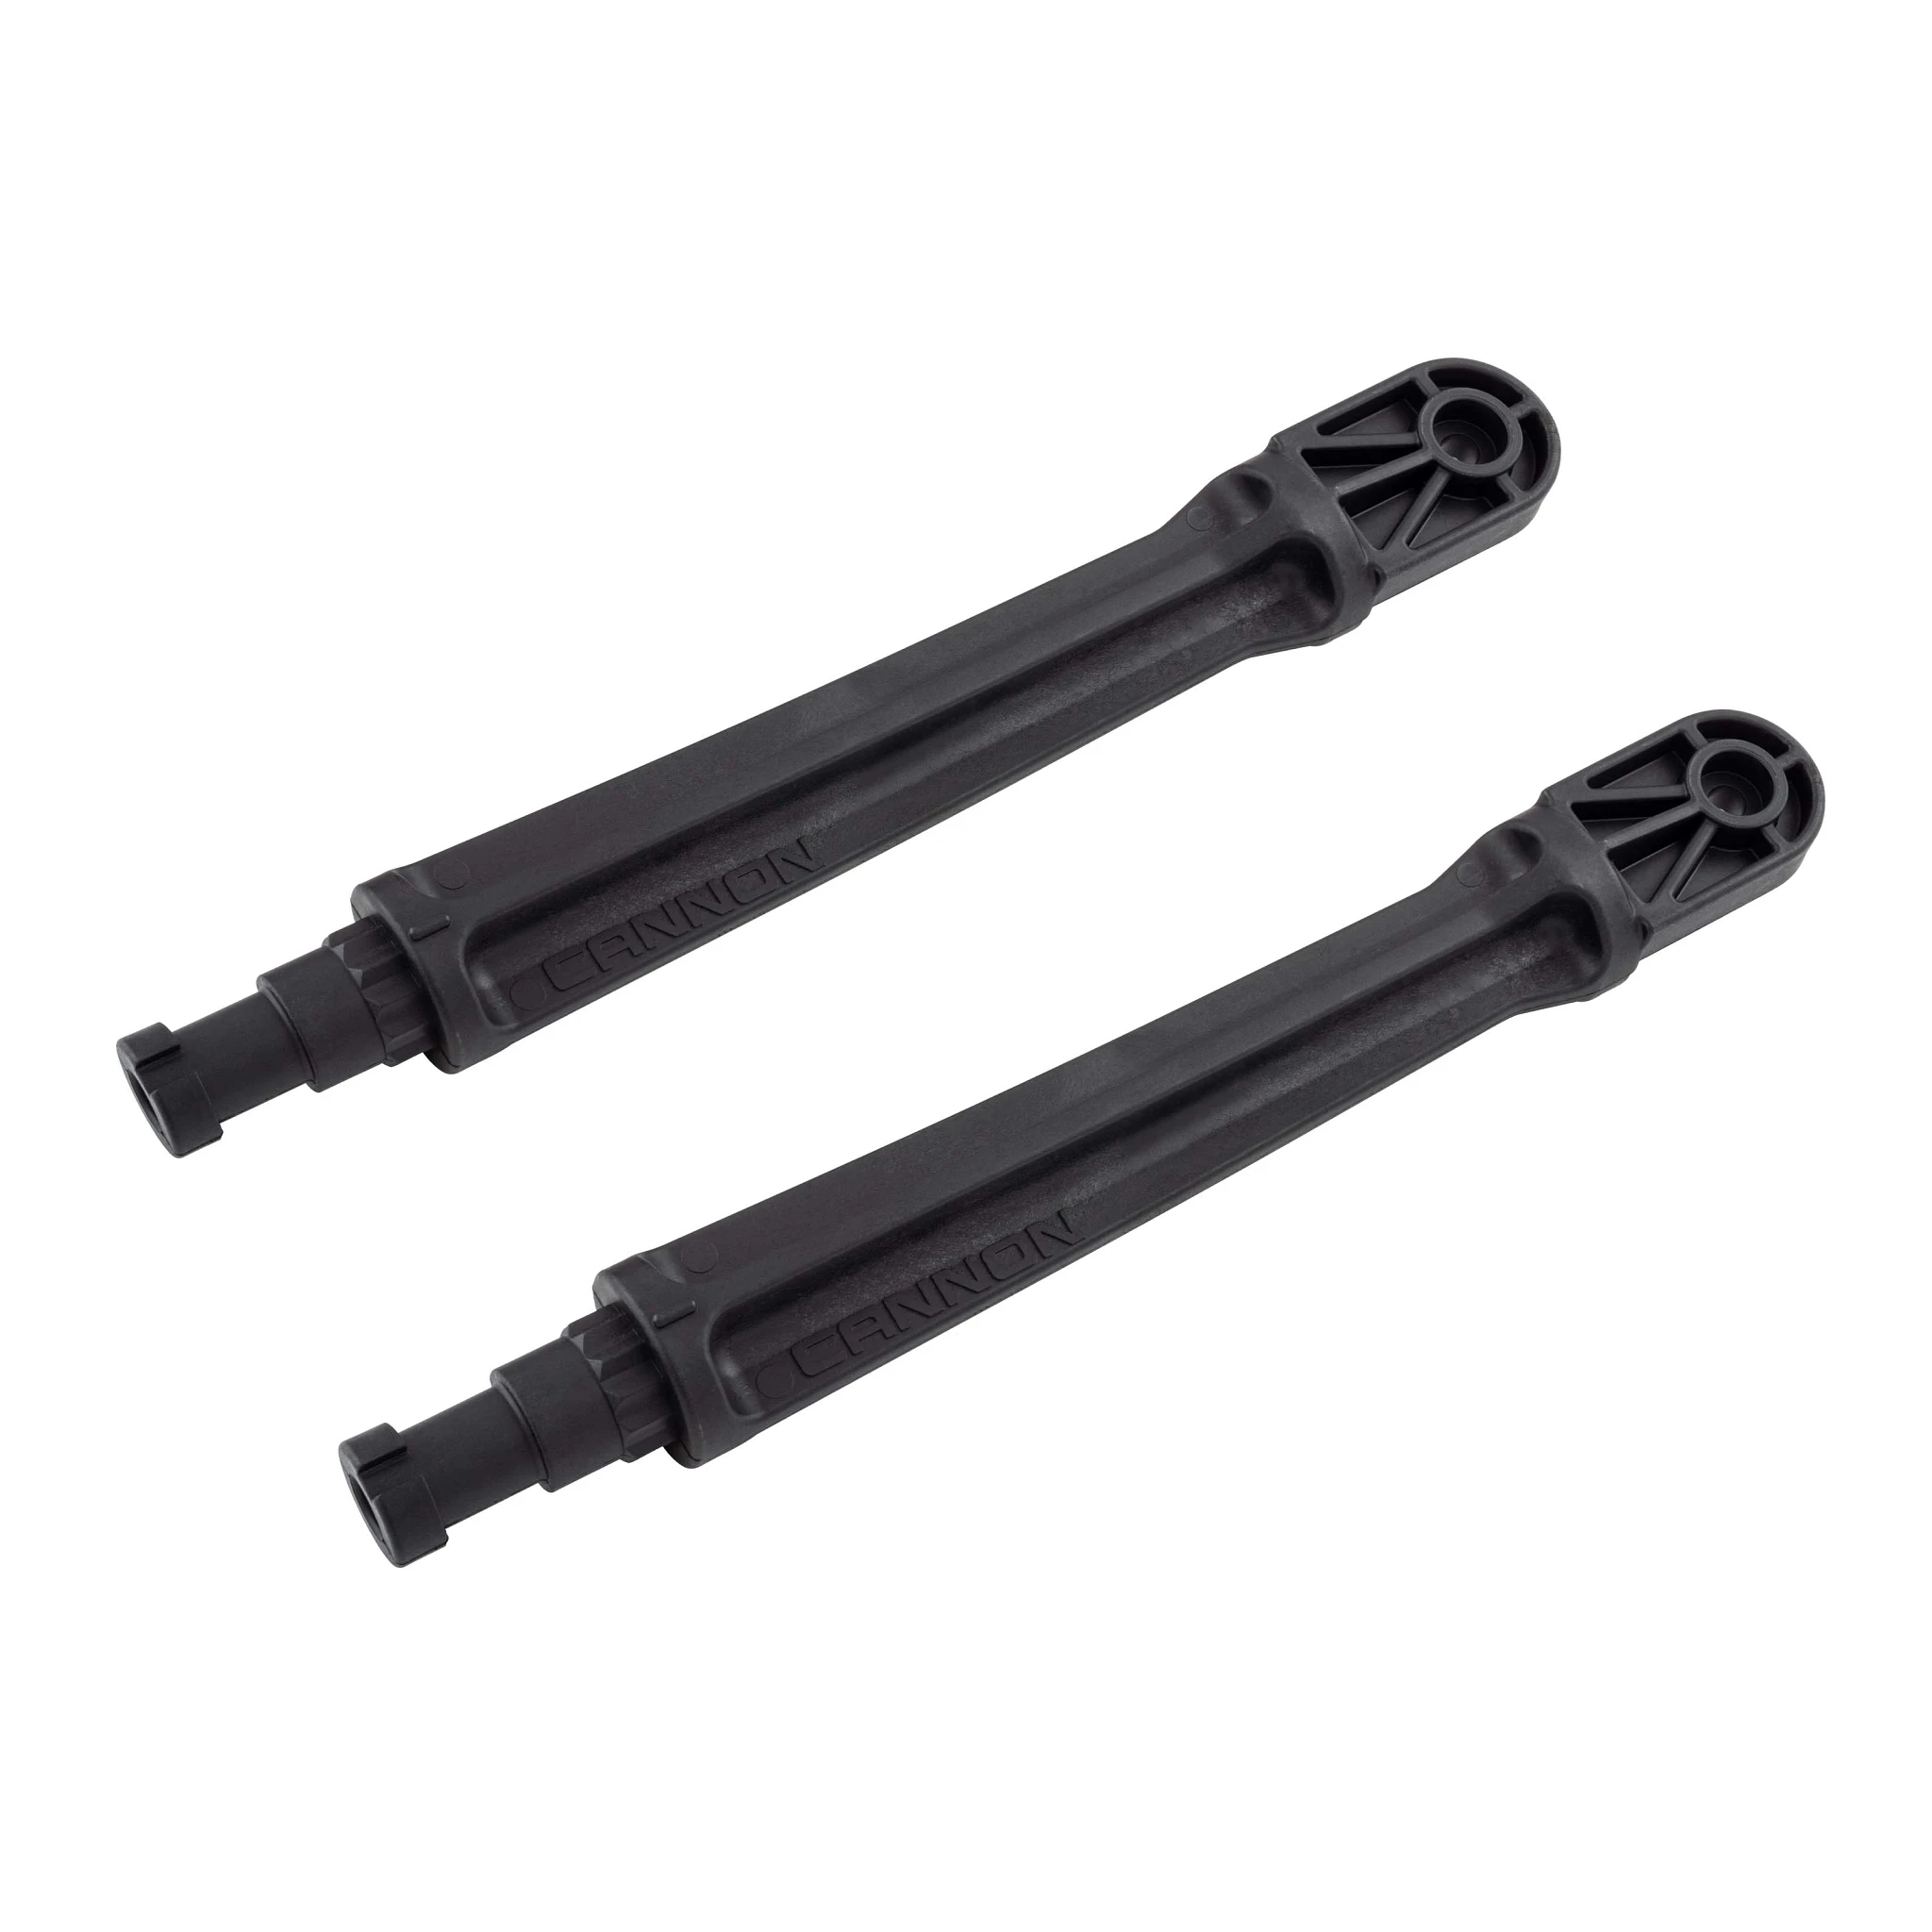 Black composite posts with toothed rod holder ends